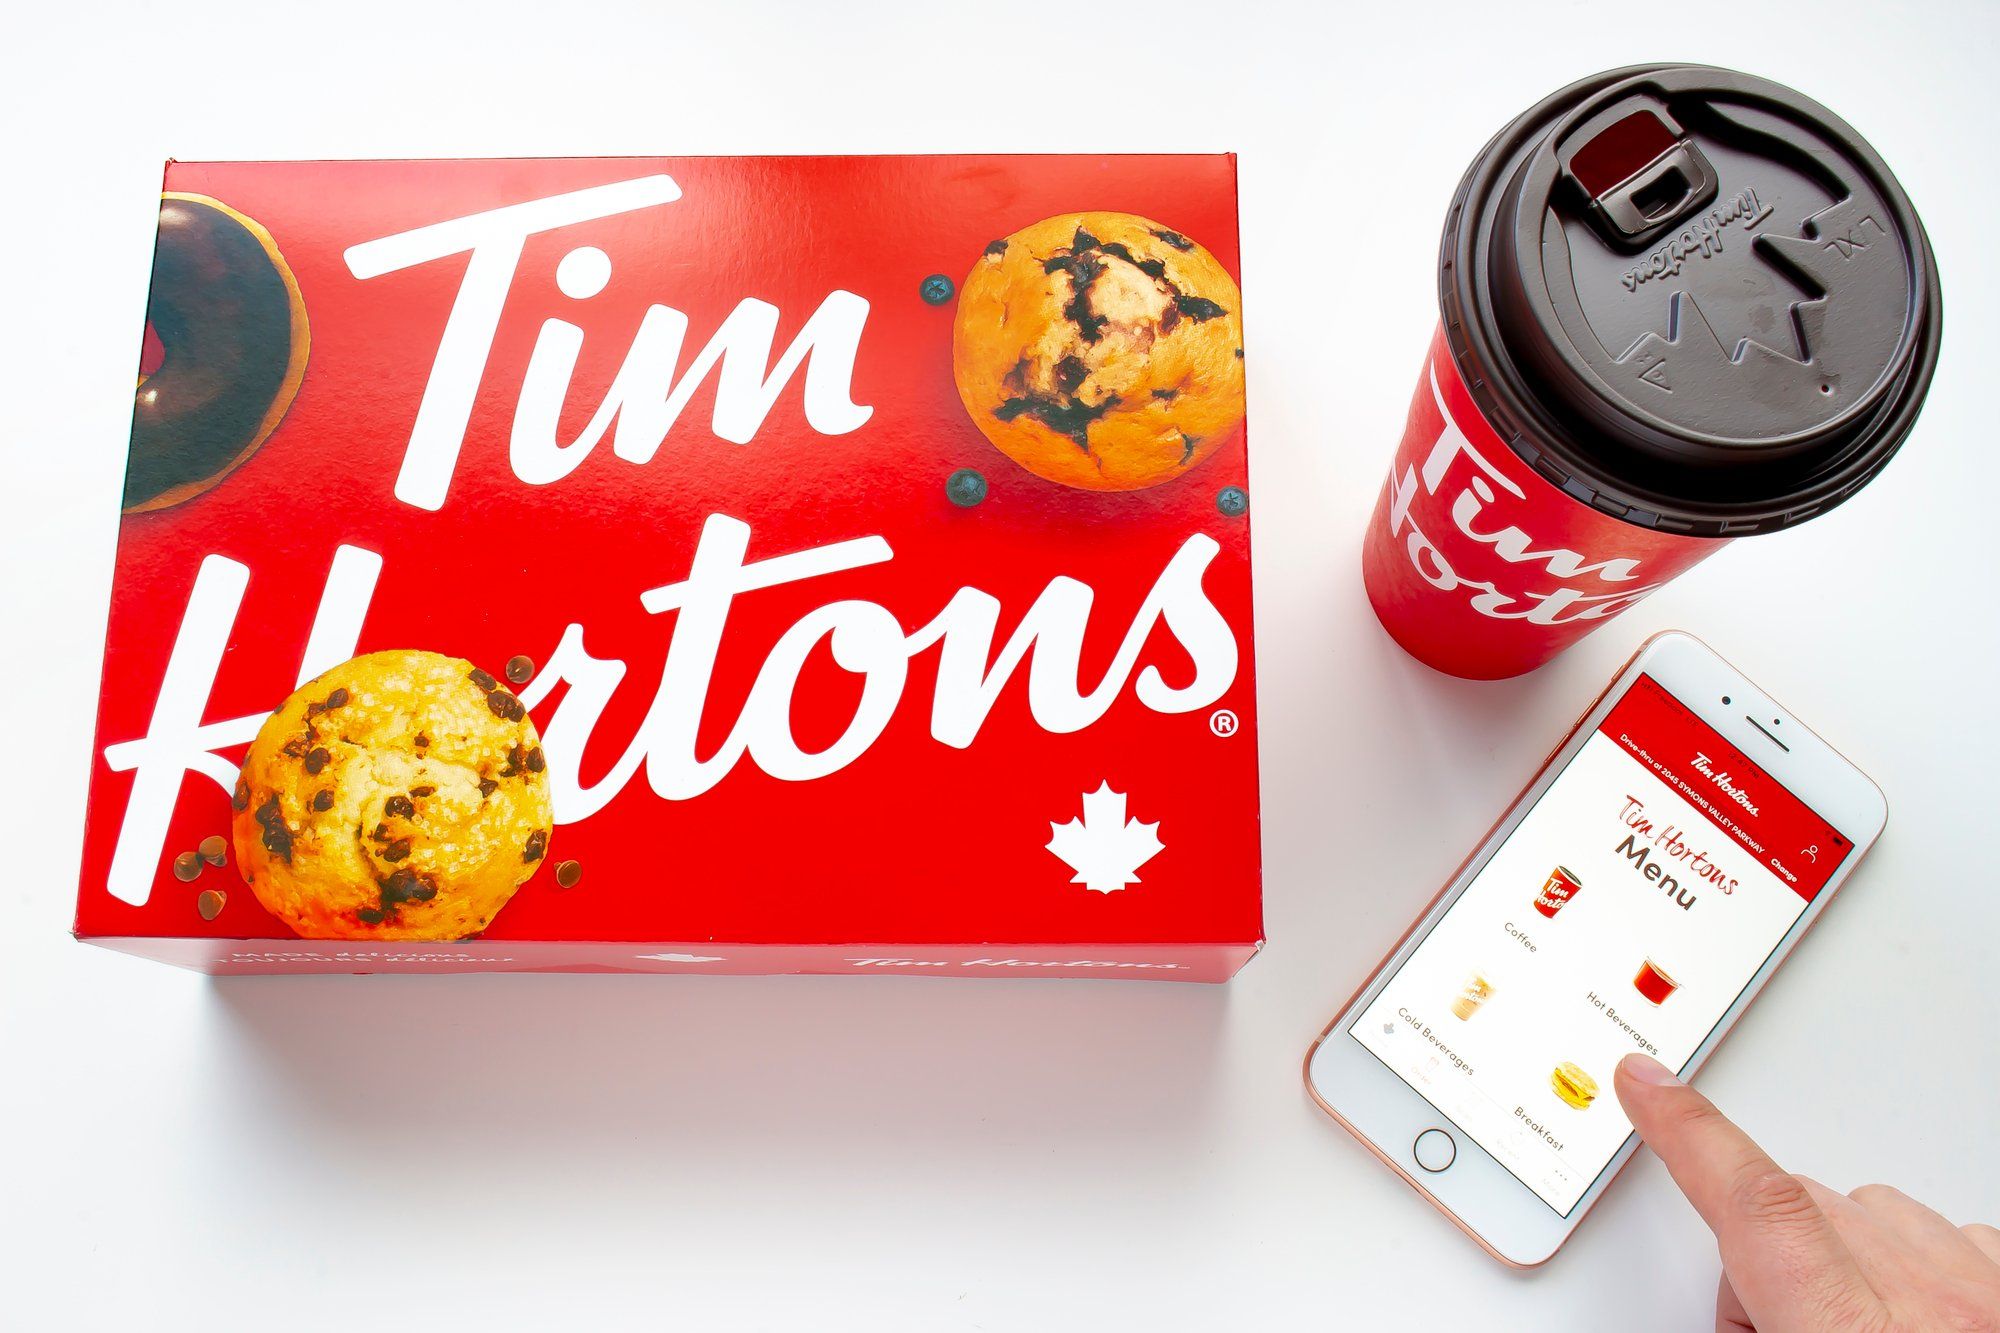 Tim Hortons regarding the investigation into the company's tracking of app users